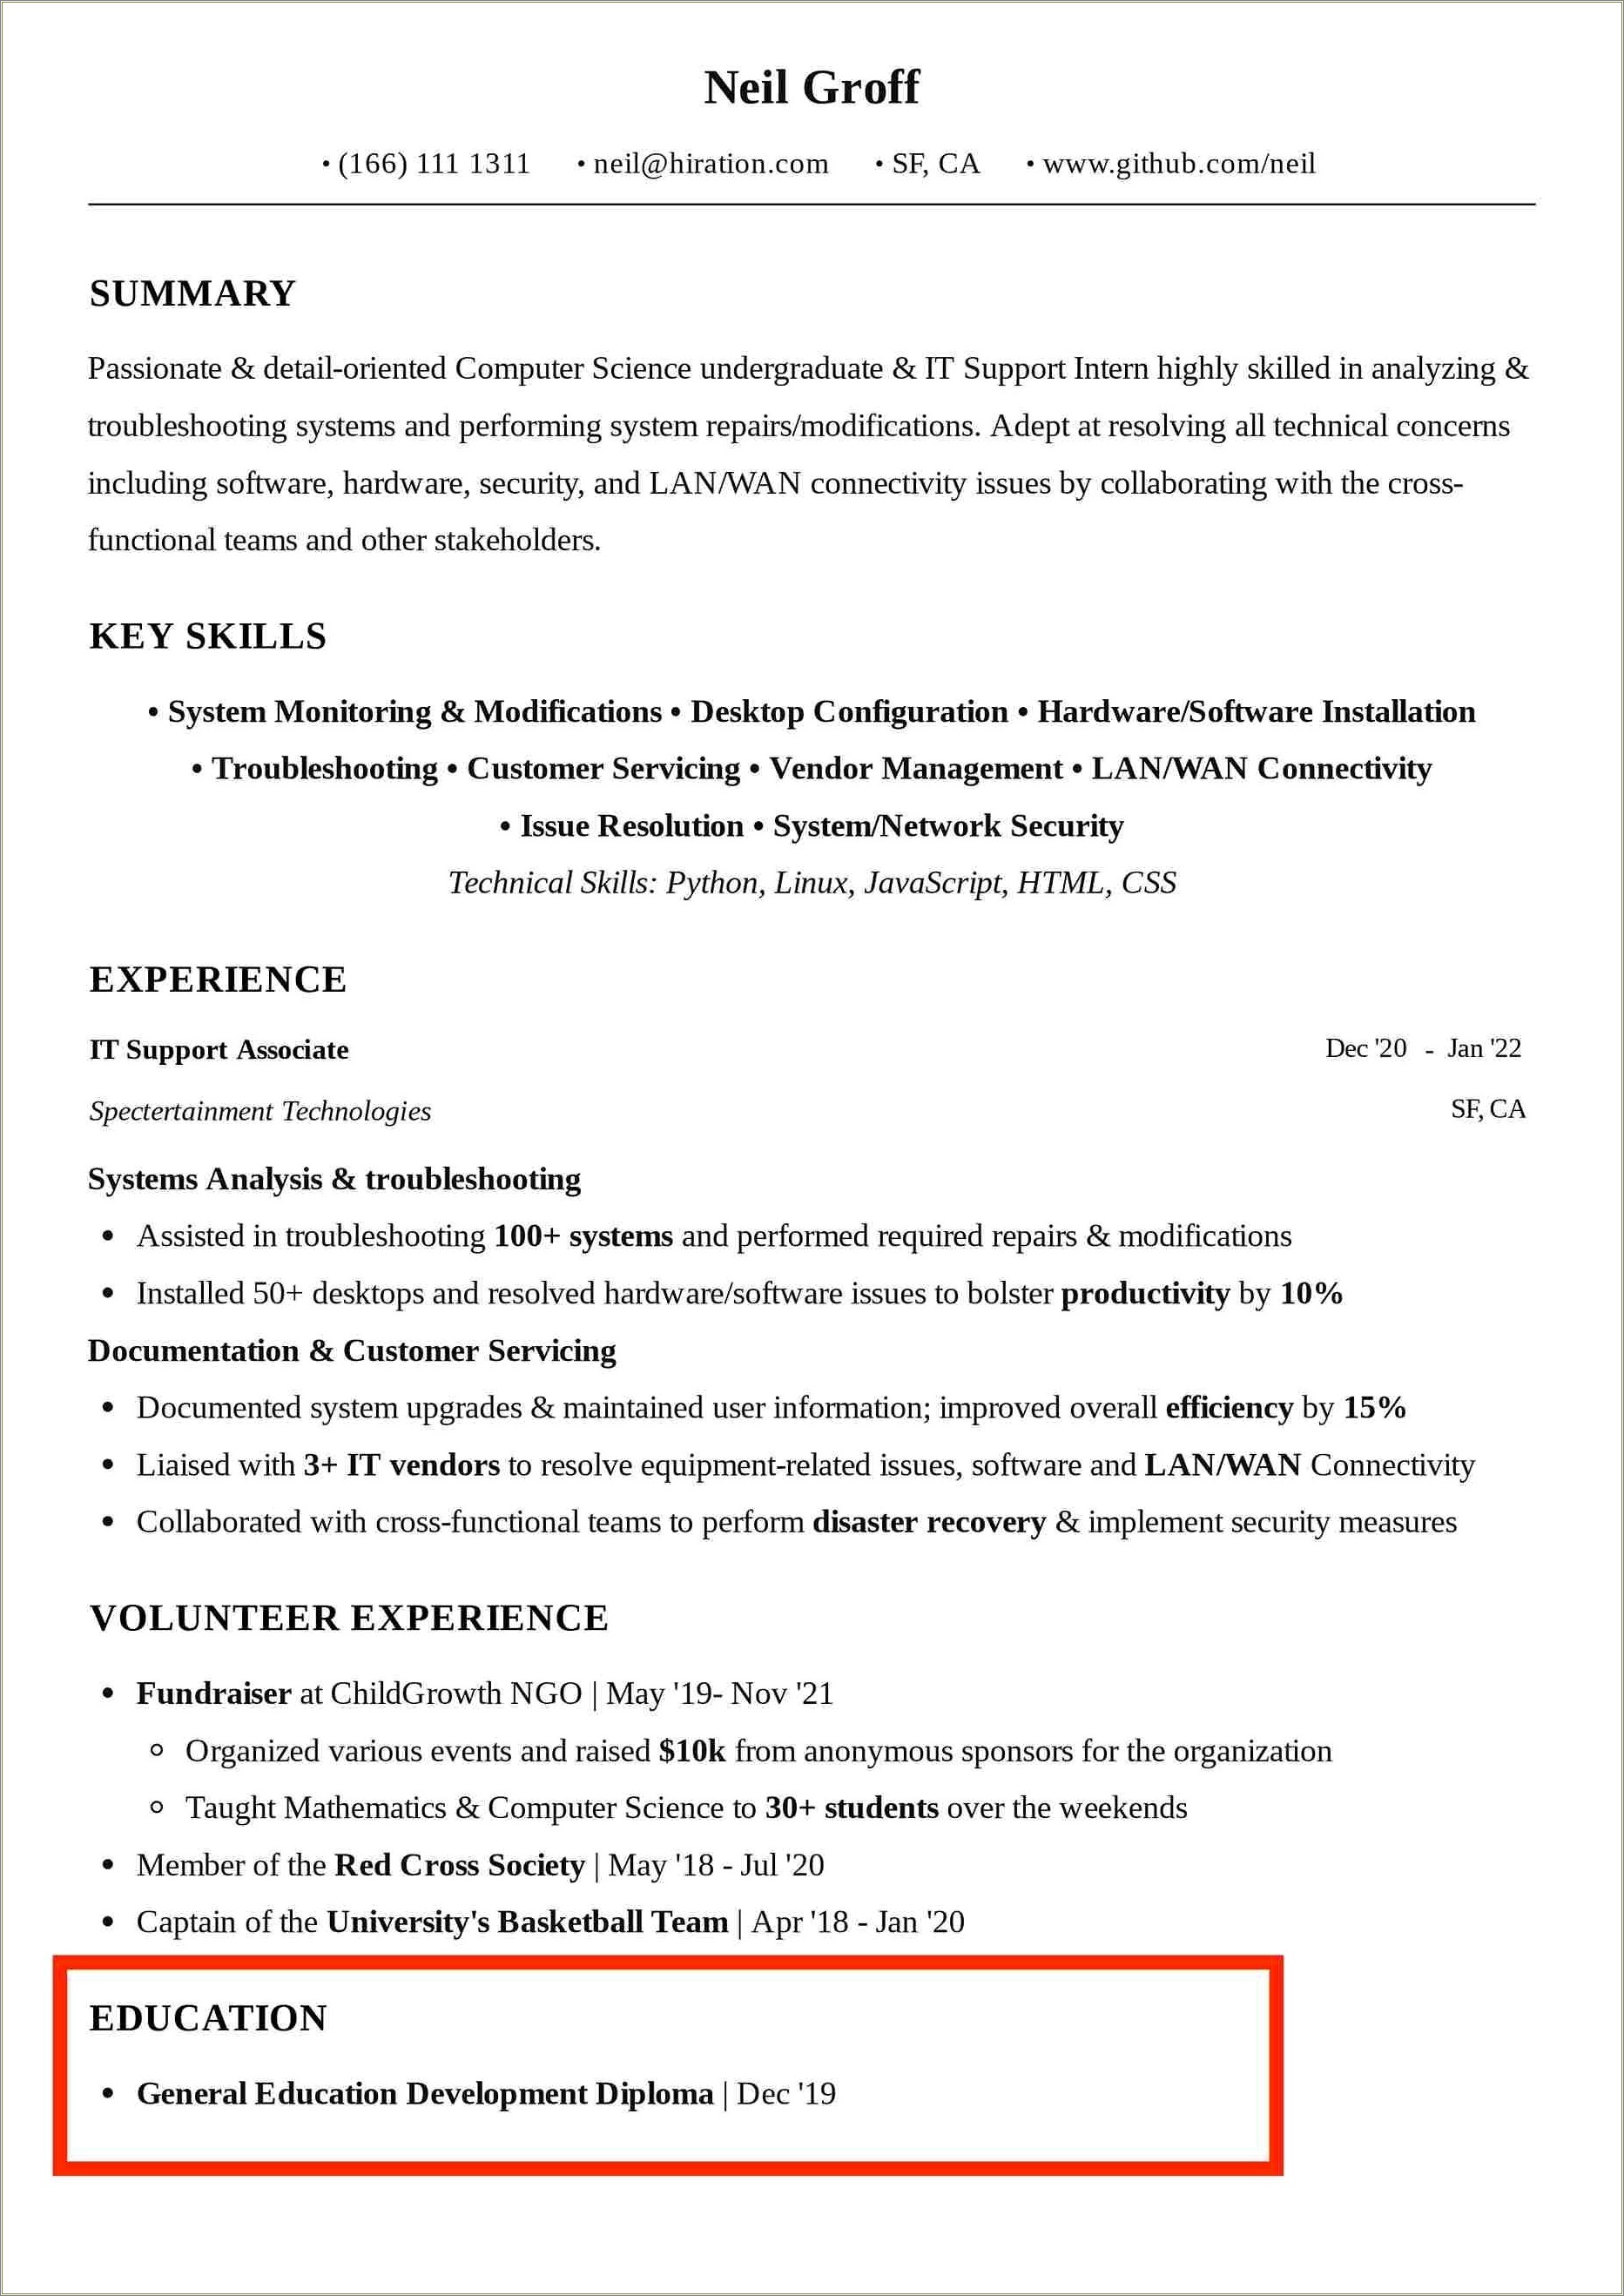 Sample Resume With Ged As Education